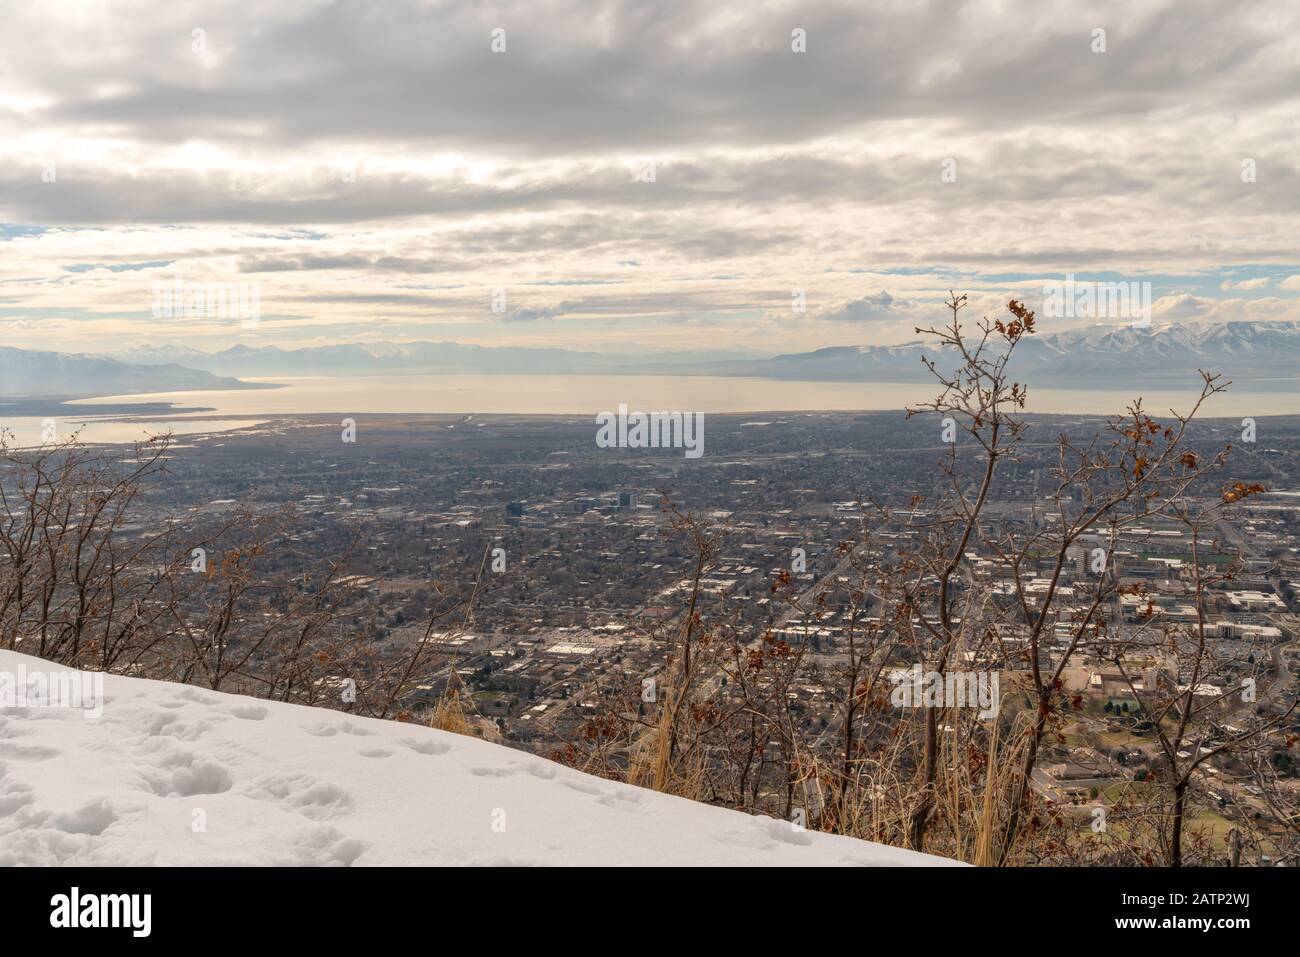 'Y' mountain in Provo, Utah. Home of Brigham Young University. Stock Photo